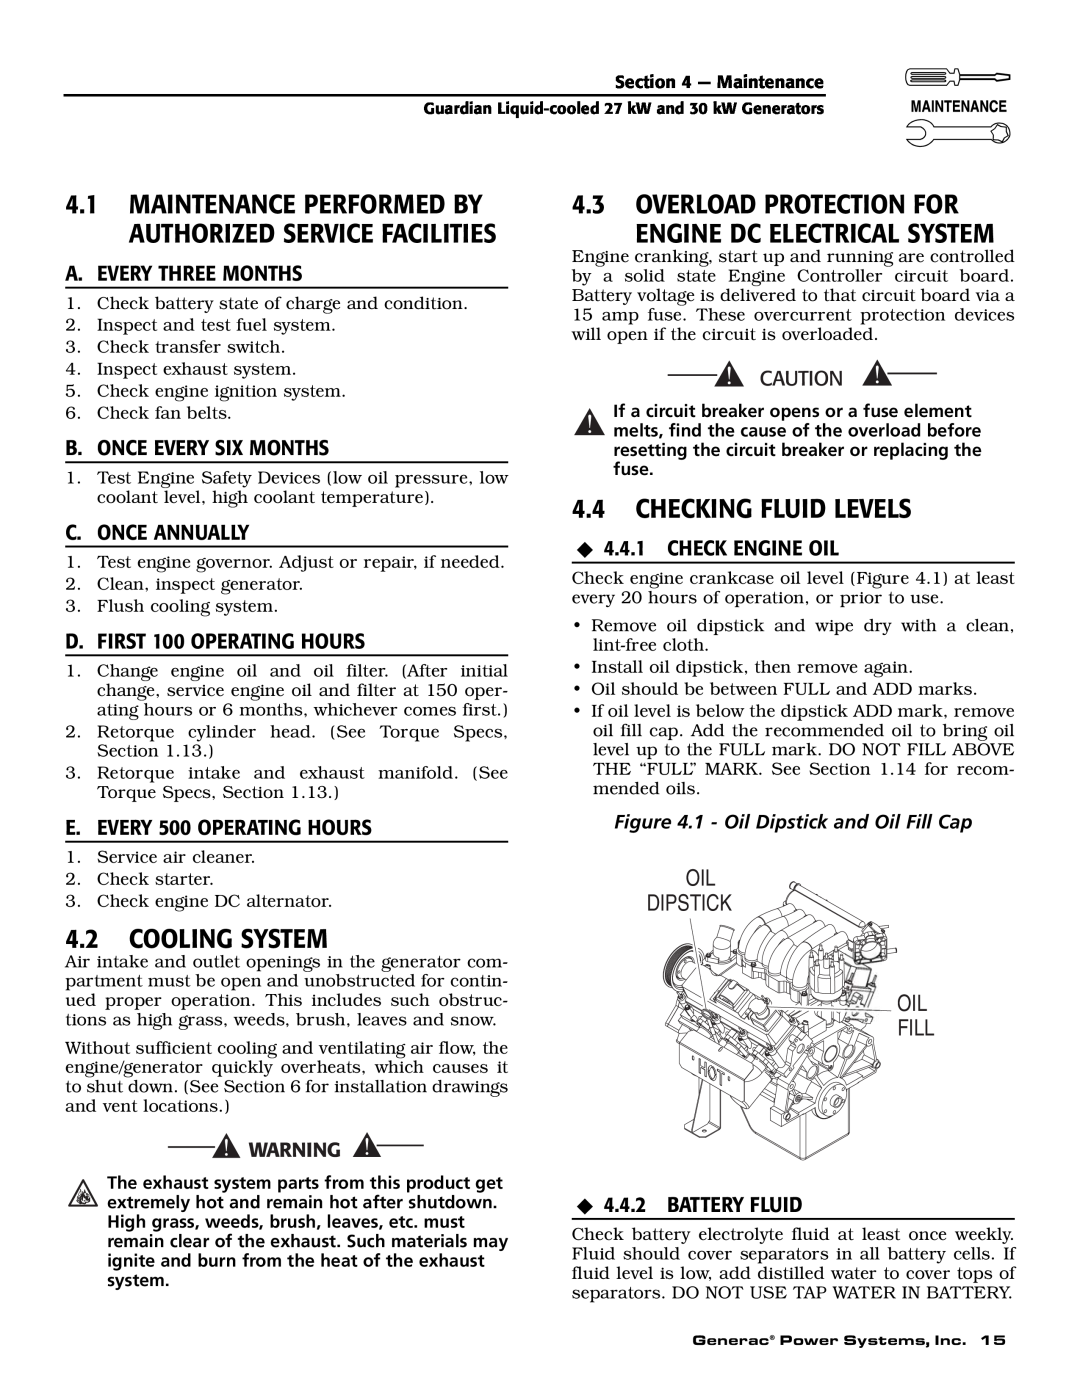 Generac Power Systems 004988-1 4.3OVERLOAD PROTECTION FOR, Engine Dc Electrical System, 4.4CHECKING FLUID LEVELS, Dipstick 